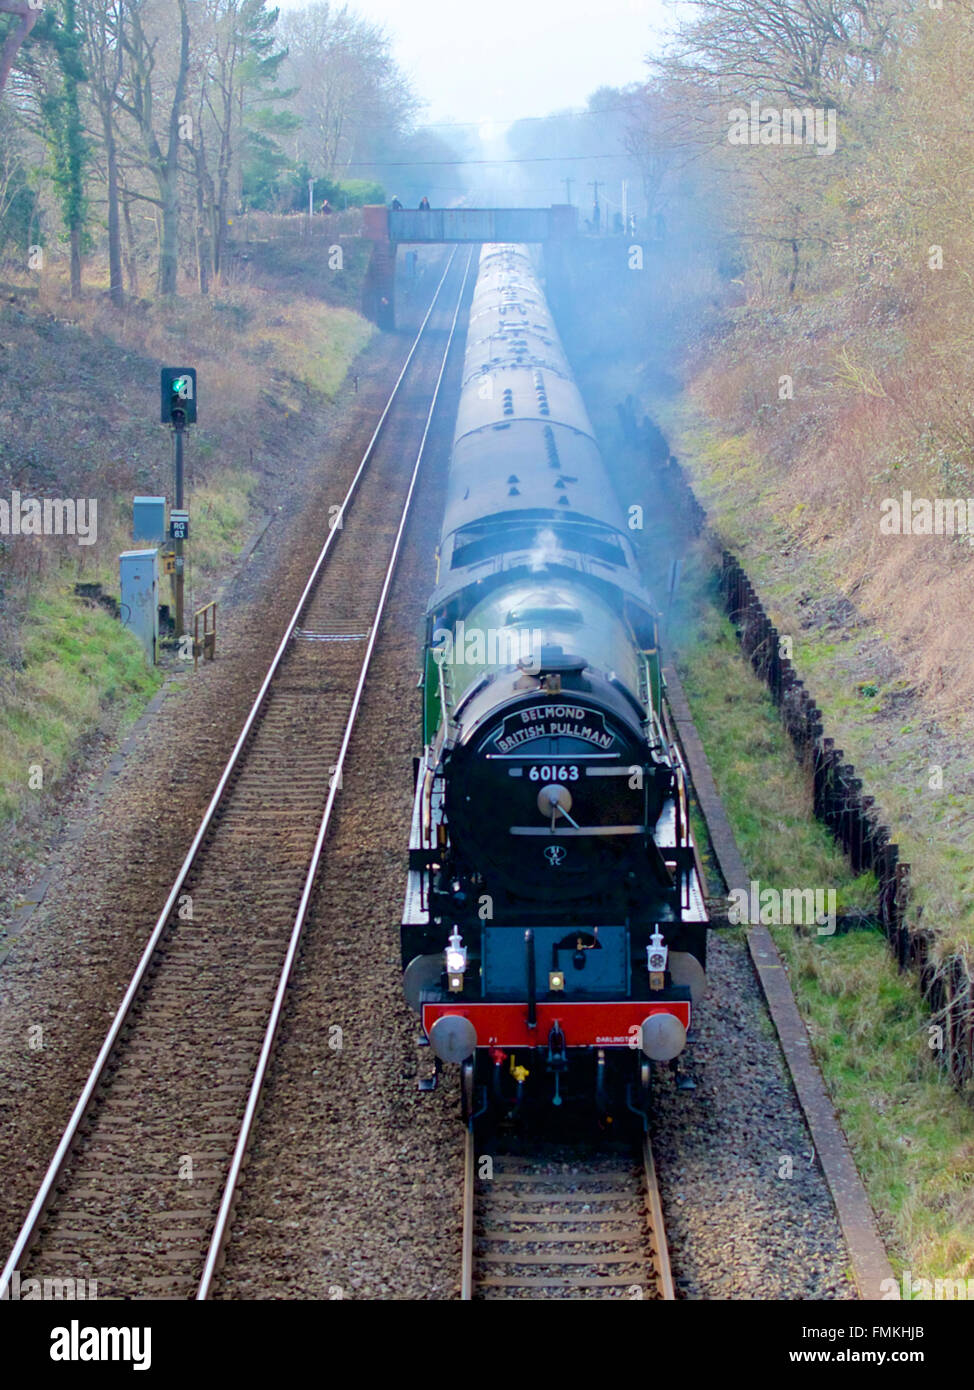 Reigate, Surrey, UK. 12th March, 2016. The Belmond British Pullman Tornado Steam Train LNER A1 Class 4-6-2 no 60163 'Tornado' steams through the Surrey Hills at Reigate, Surrey. 1504hrs Saturday 12th March 2016 en route to London Victoria. Photo: Credit: Lindsay Constable / Alamy Live News Stock Photo